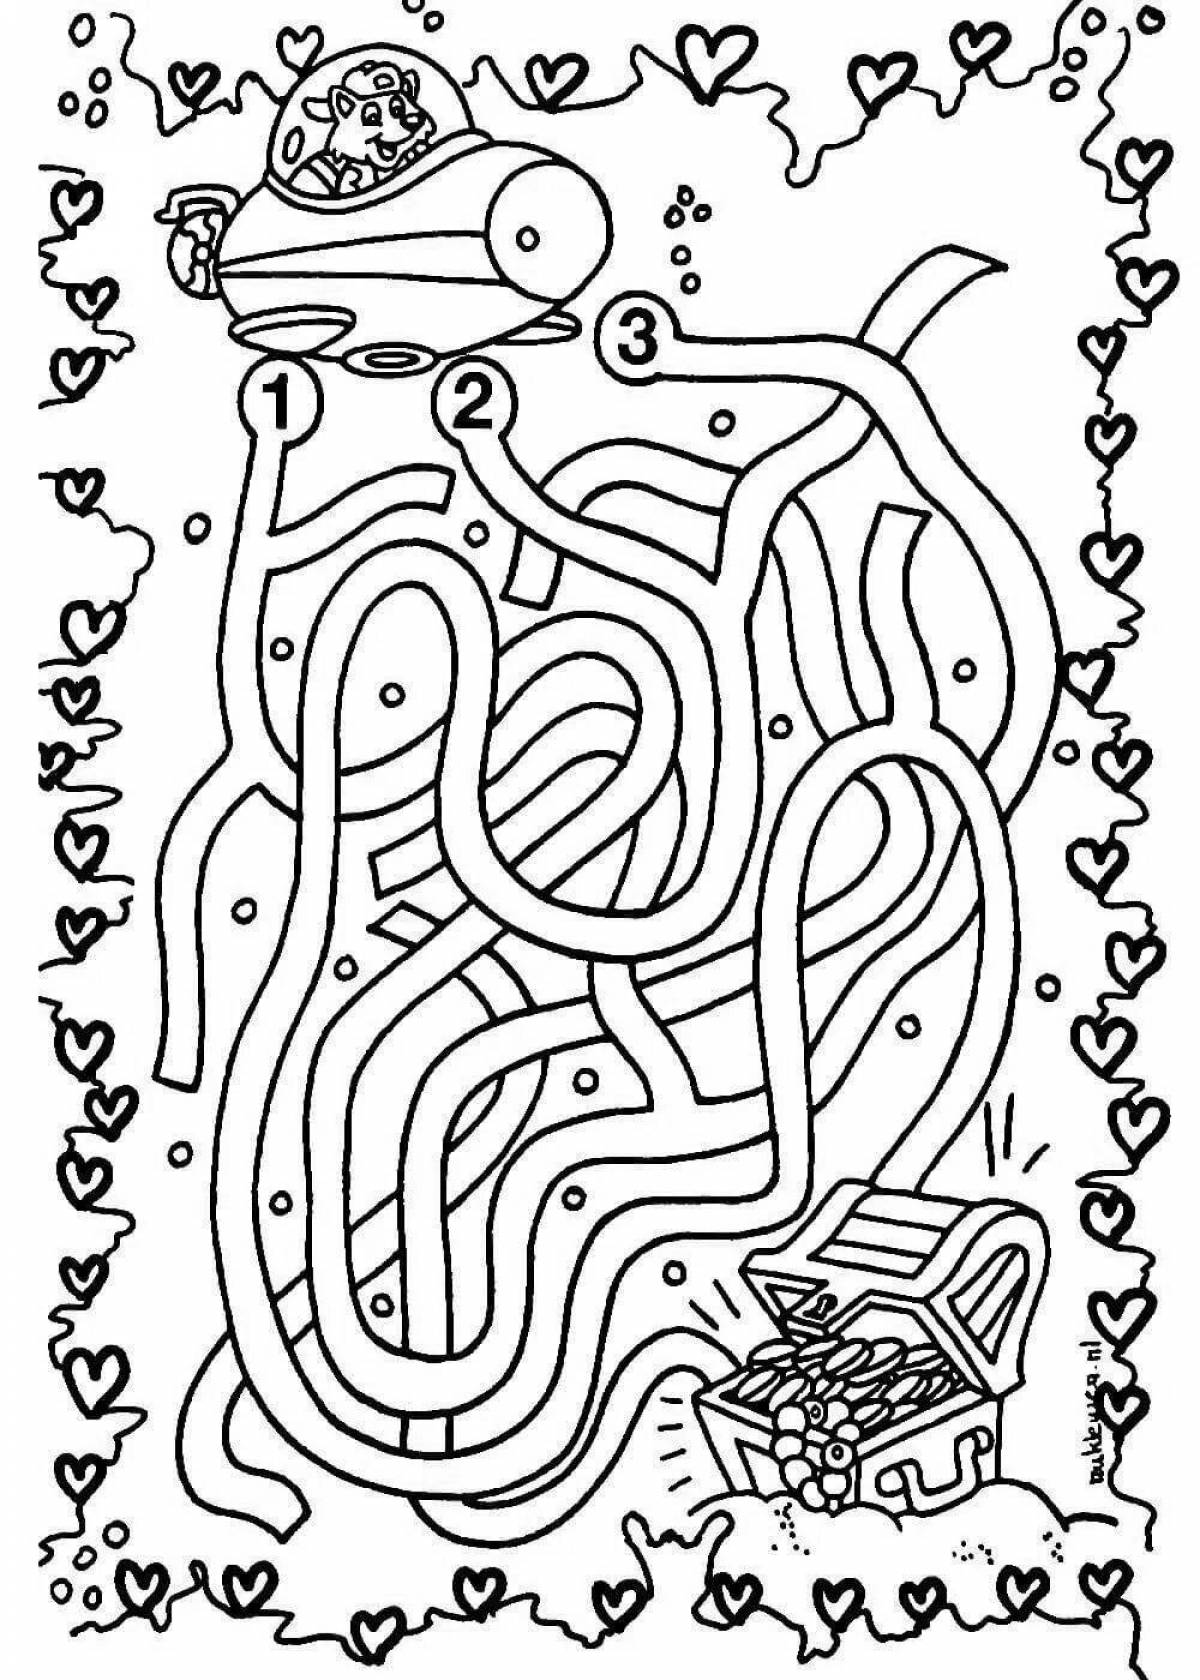 Fabulous maze coloring for children 10 years old